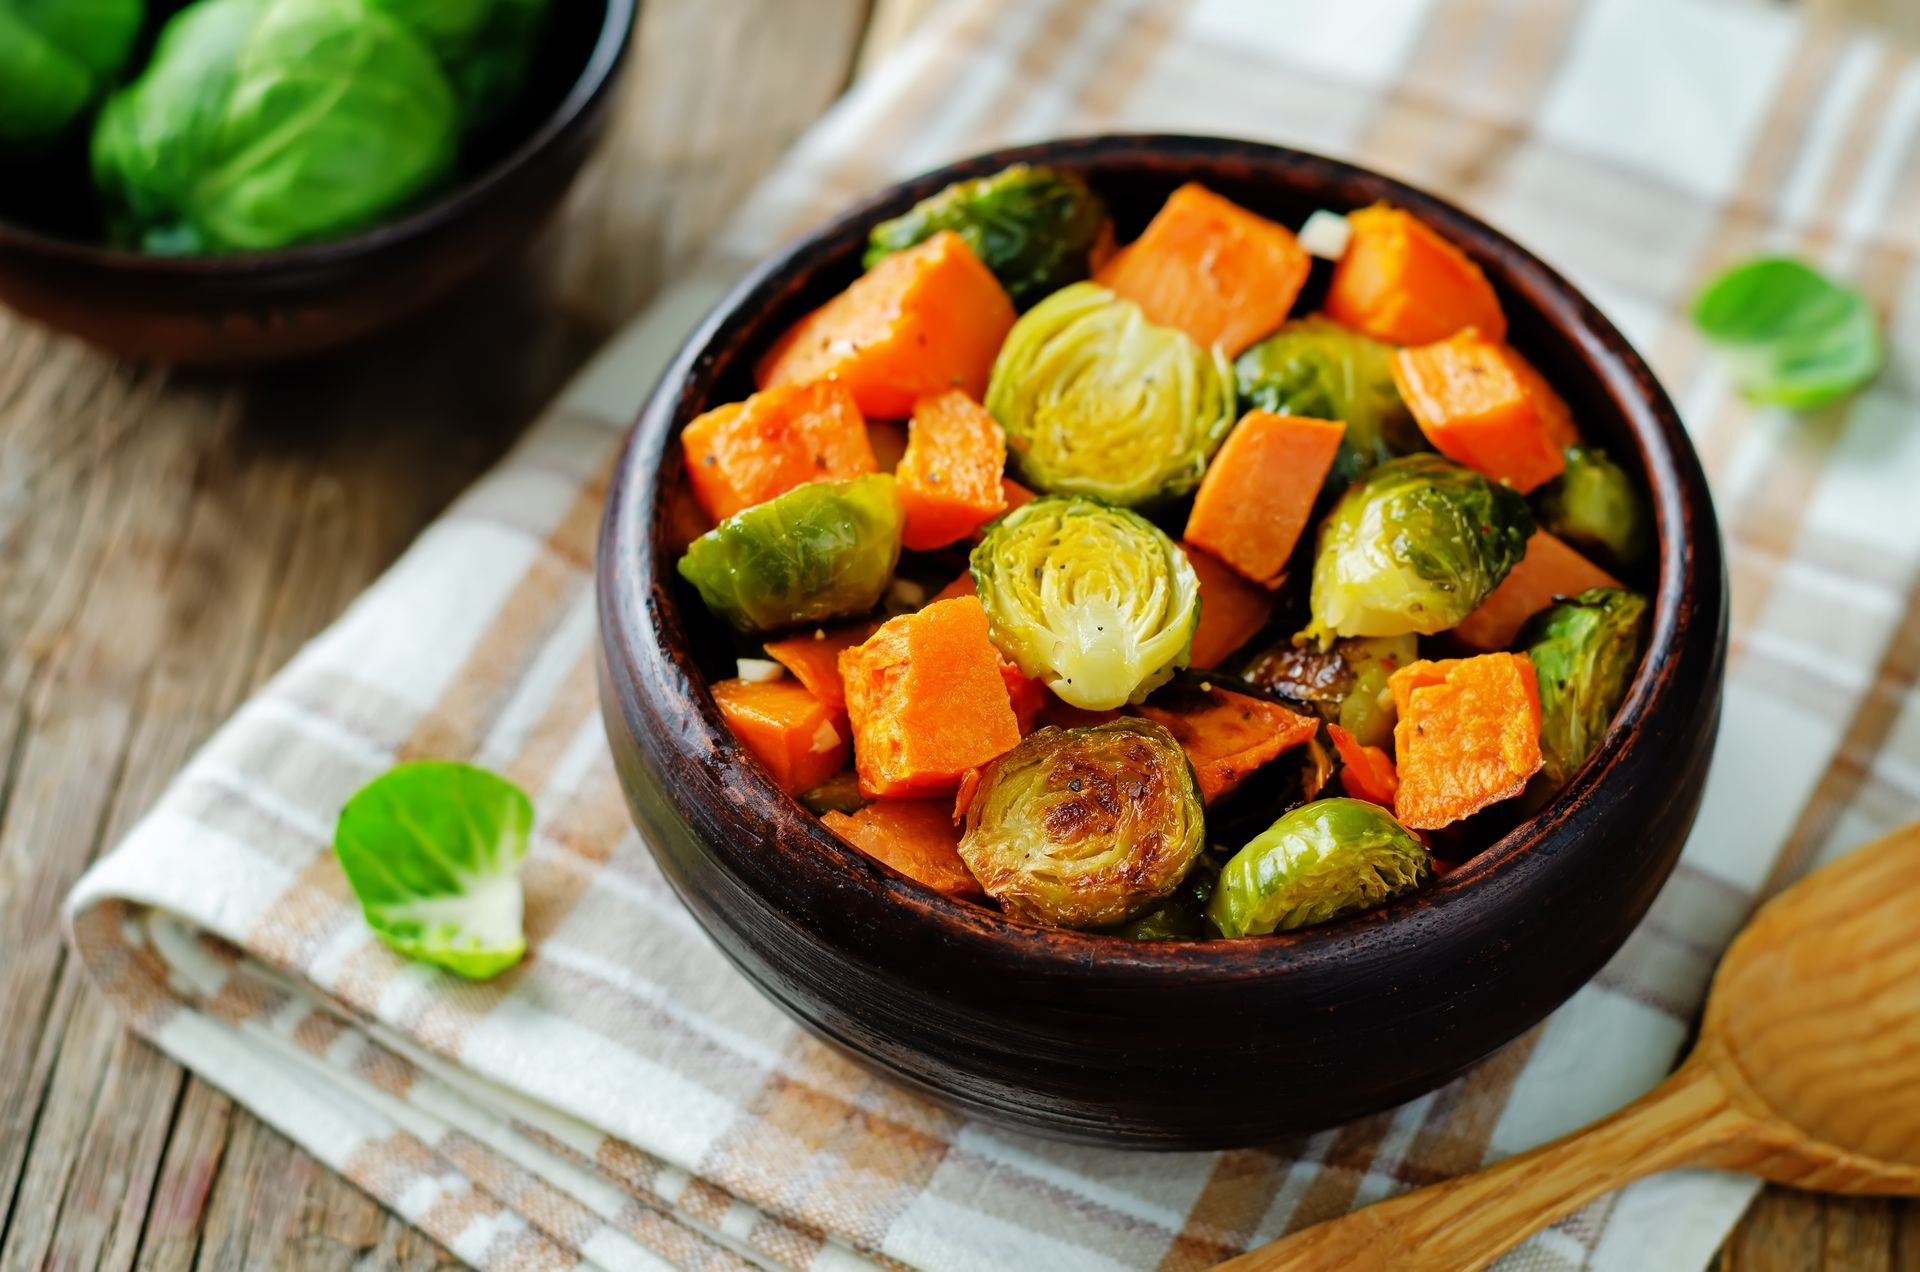 Roasted carrots and brussel sprouts